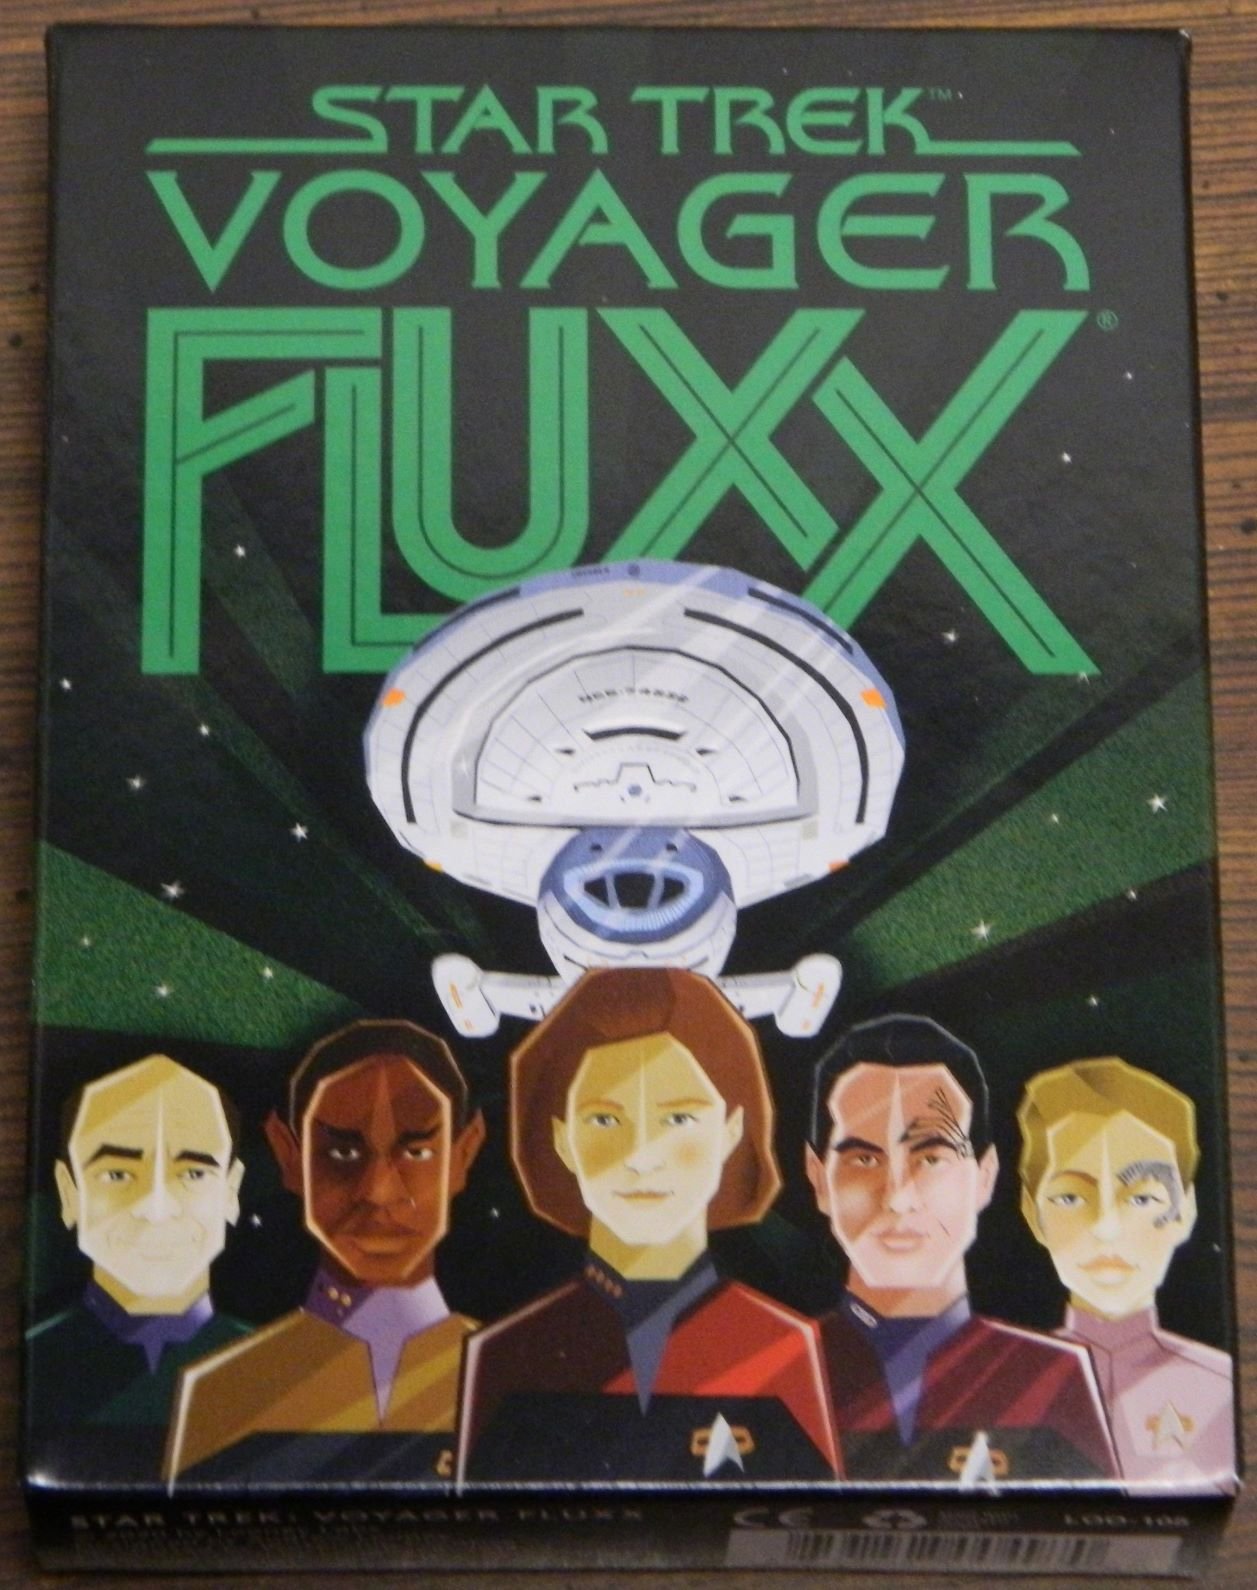 Star Trek: Voyager Fluxx Card Game Review and Rules